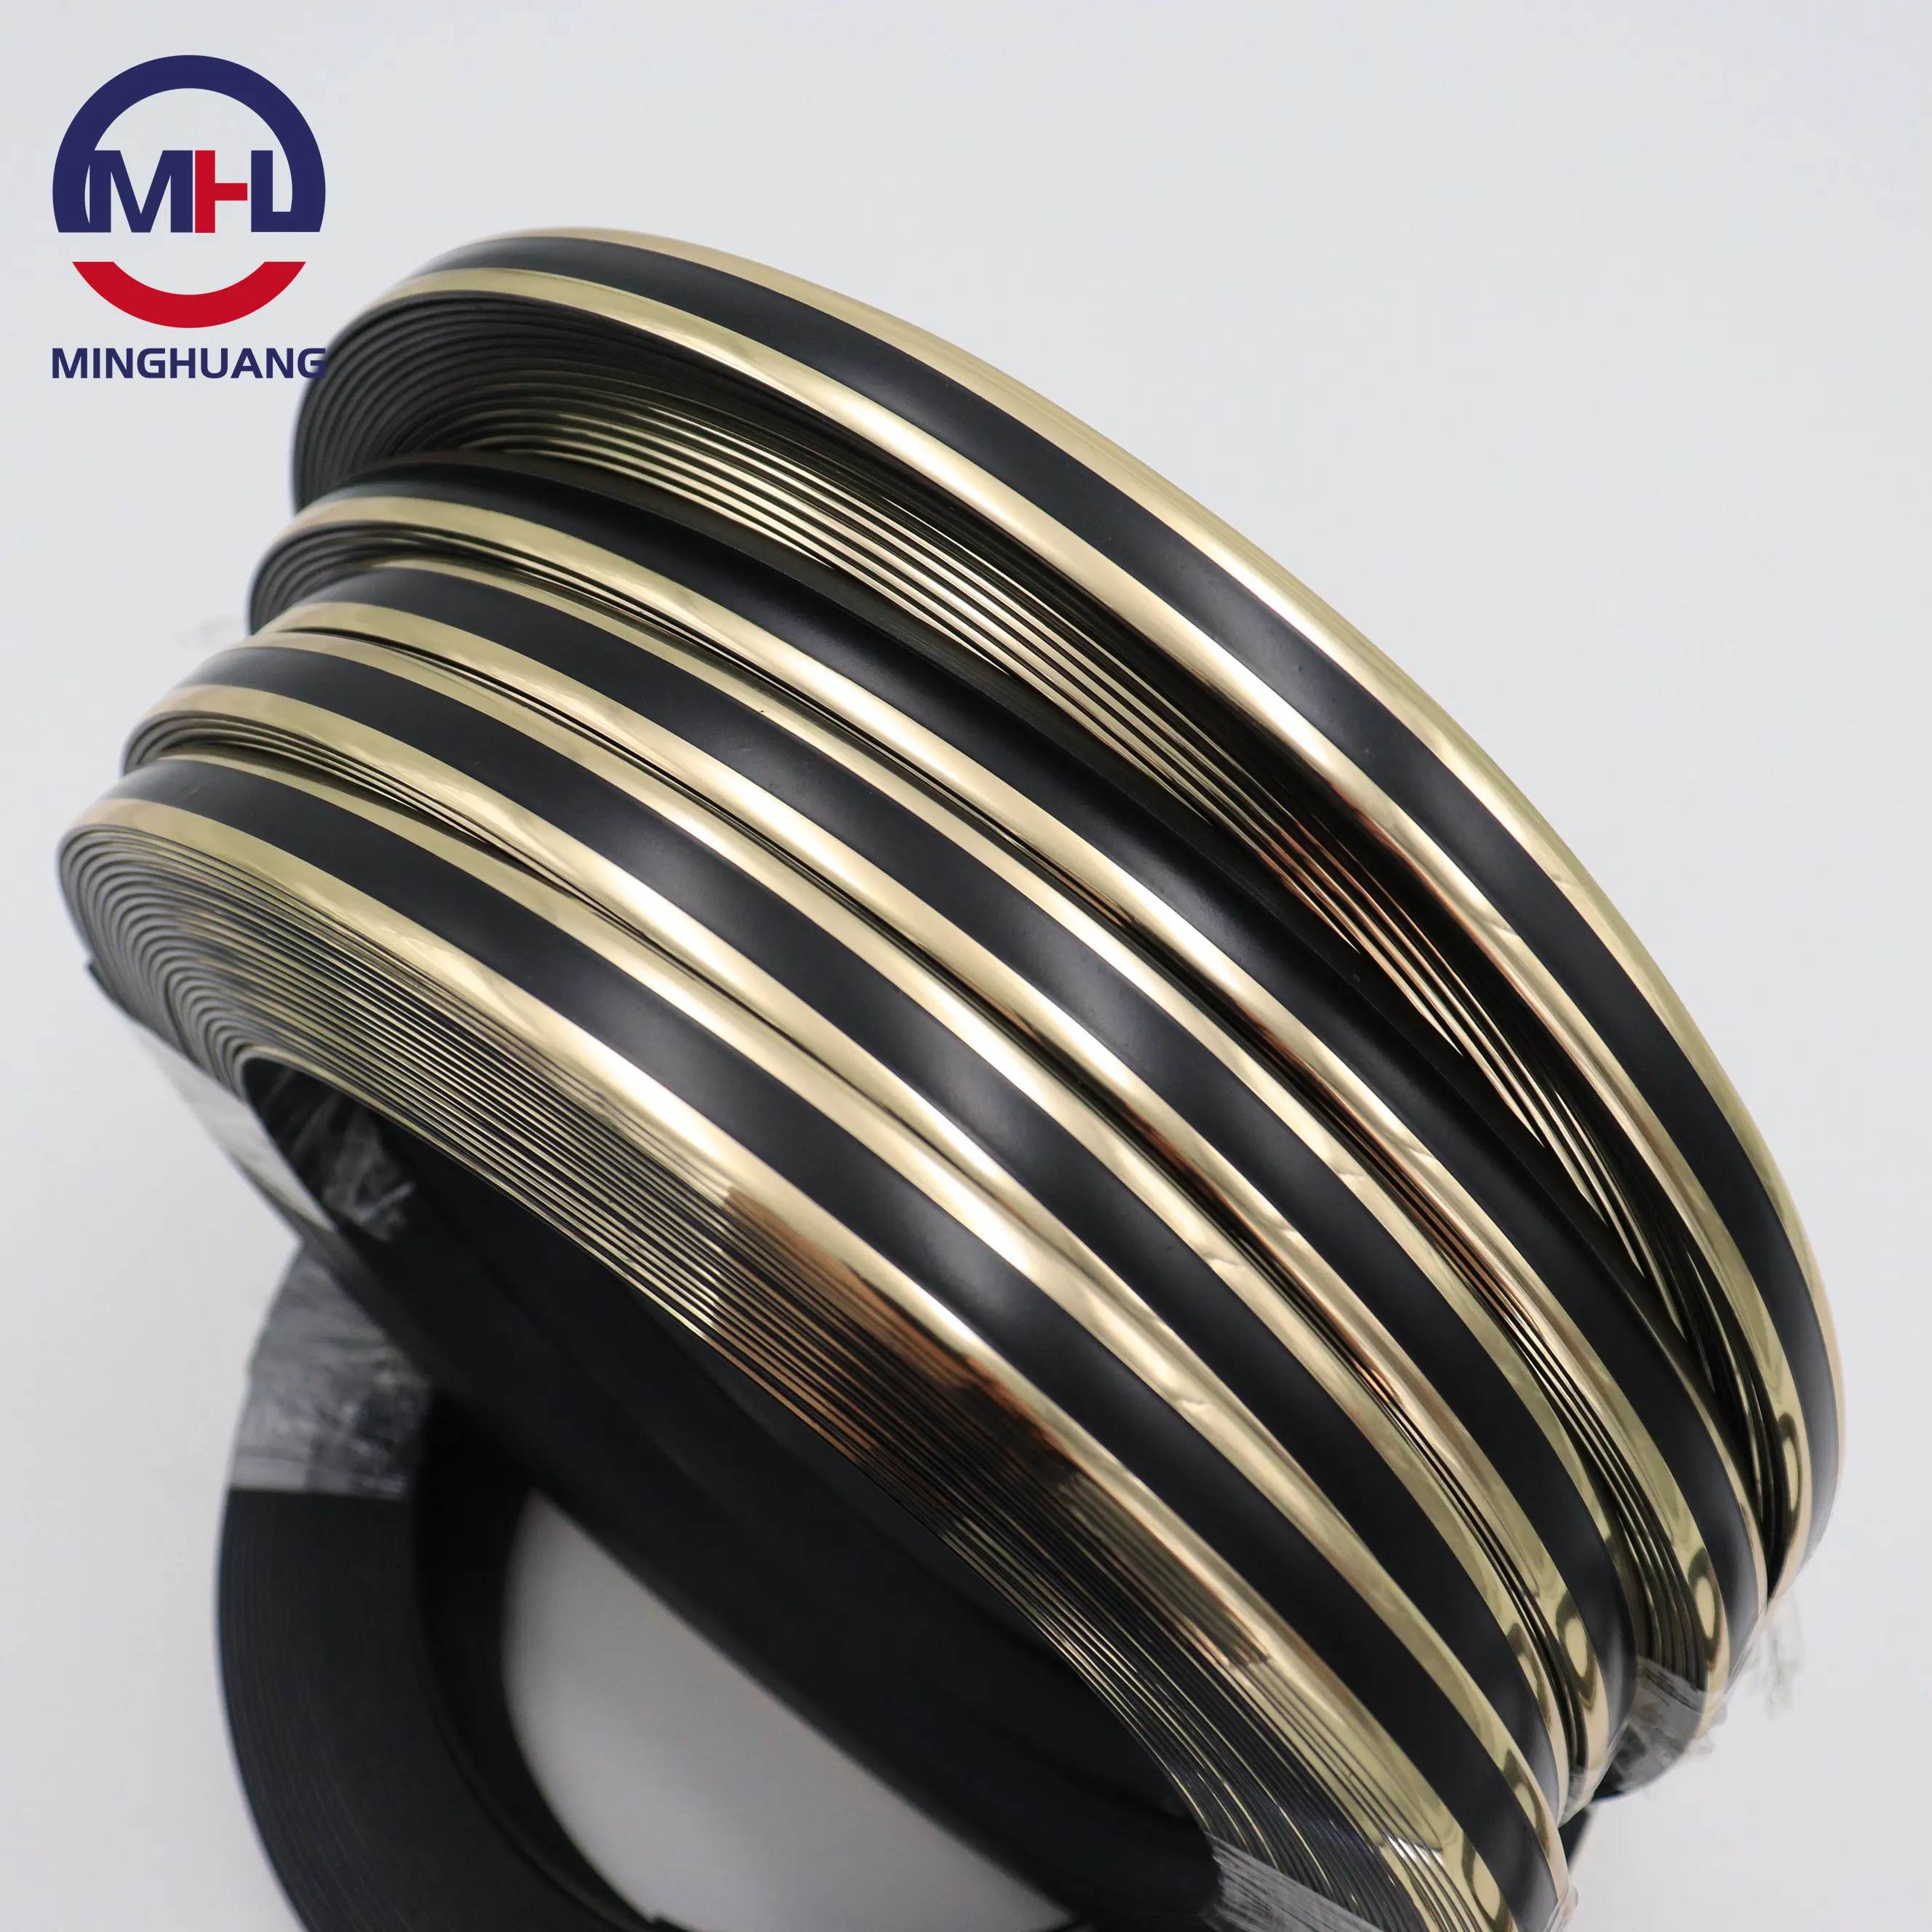 MH Hot Selling Products Furniture Edge Trim Strip Flexible Plastic Strips Gold Edge Banding Tapes